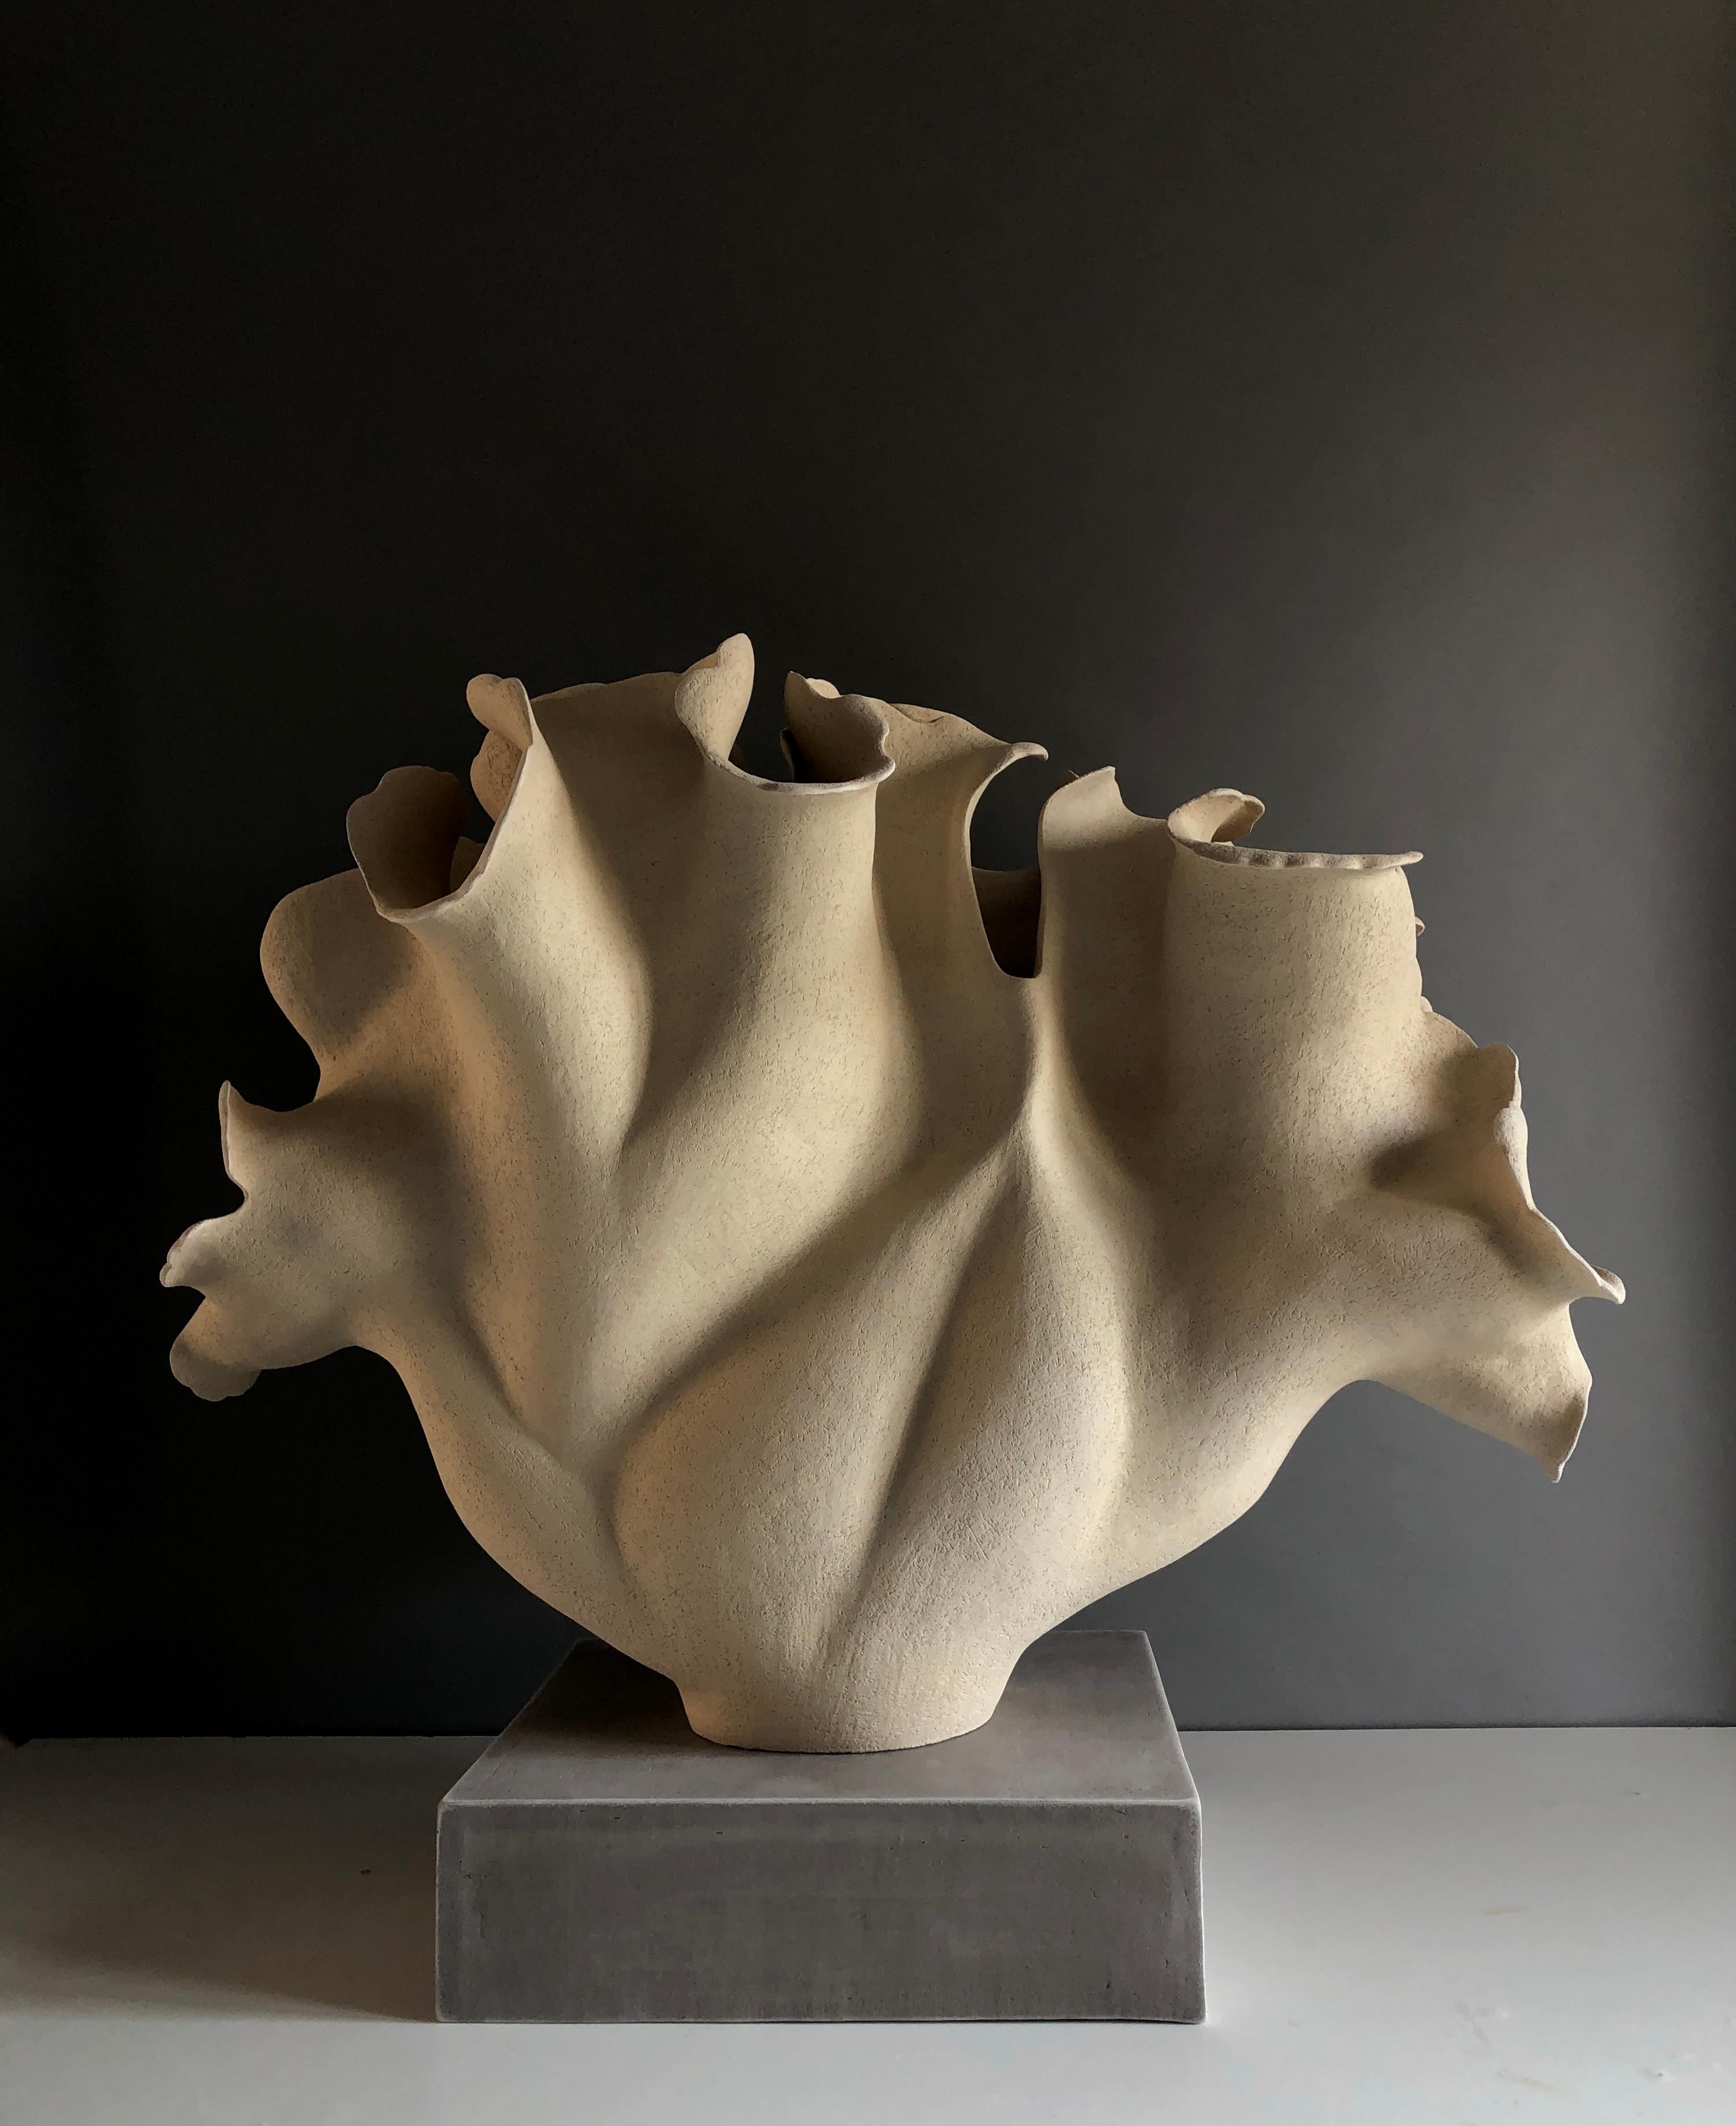 Inspired by a leaf-like botanical form, this sculpture is hand-built in a sand-coloured stoneware with a slightly rough carved surface. It sits on a rectangular ceramic base made of grey stoneware with a semi-rough texture.
The undulating surface